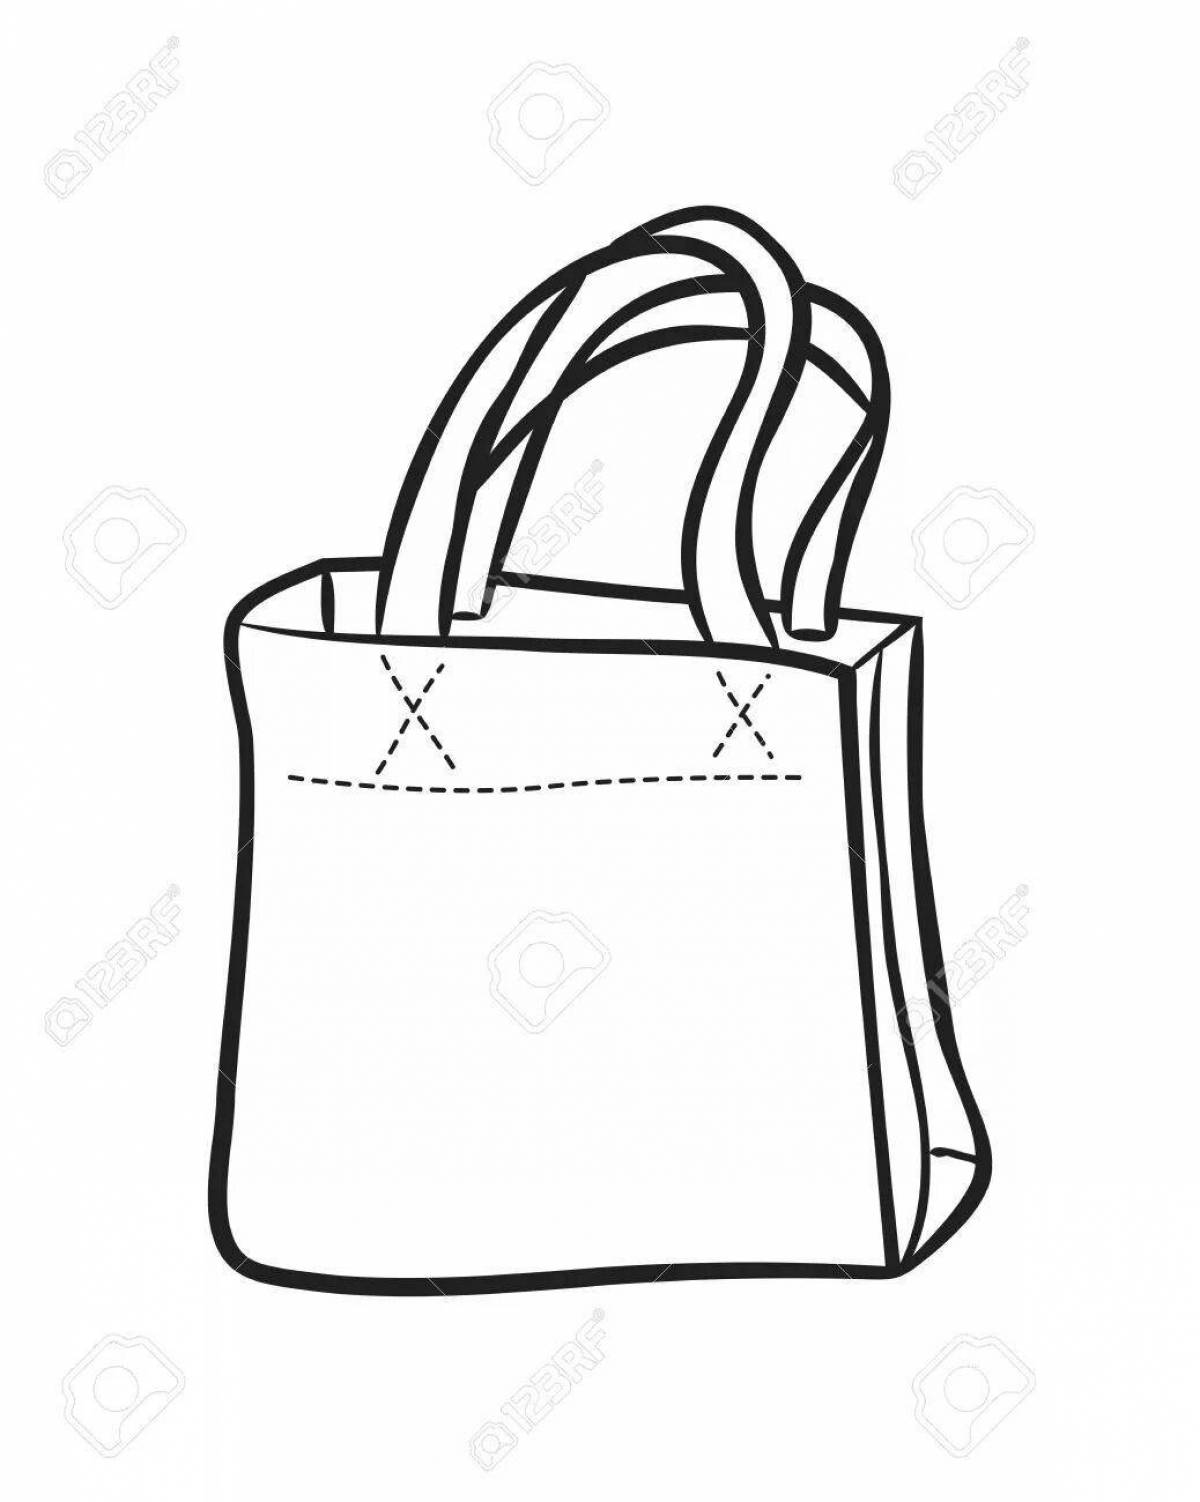 Coloring page beach bag with colorful polka dots